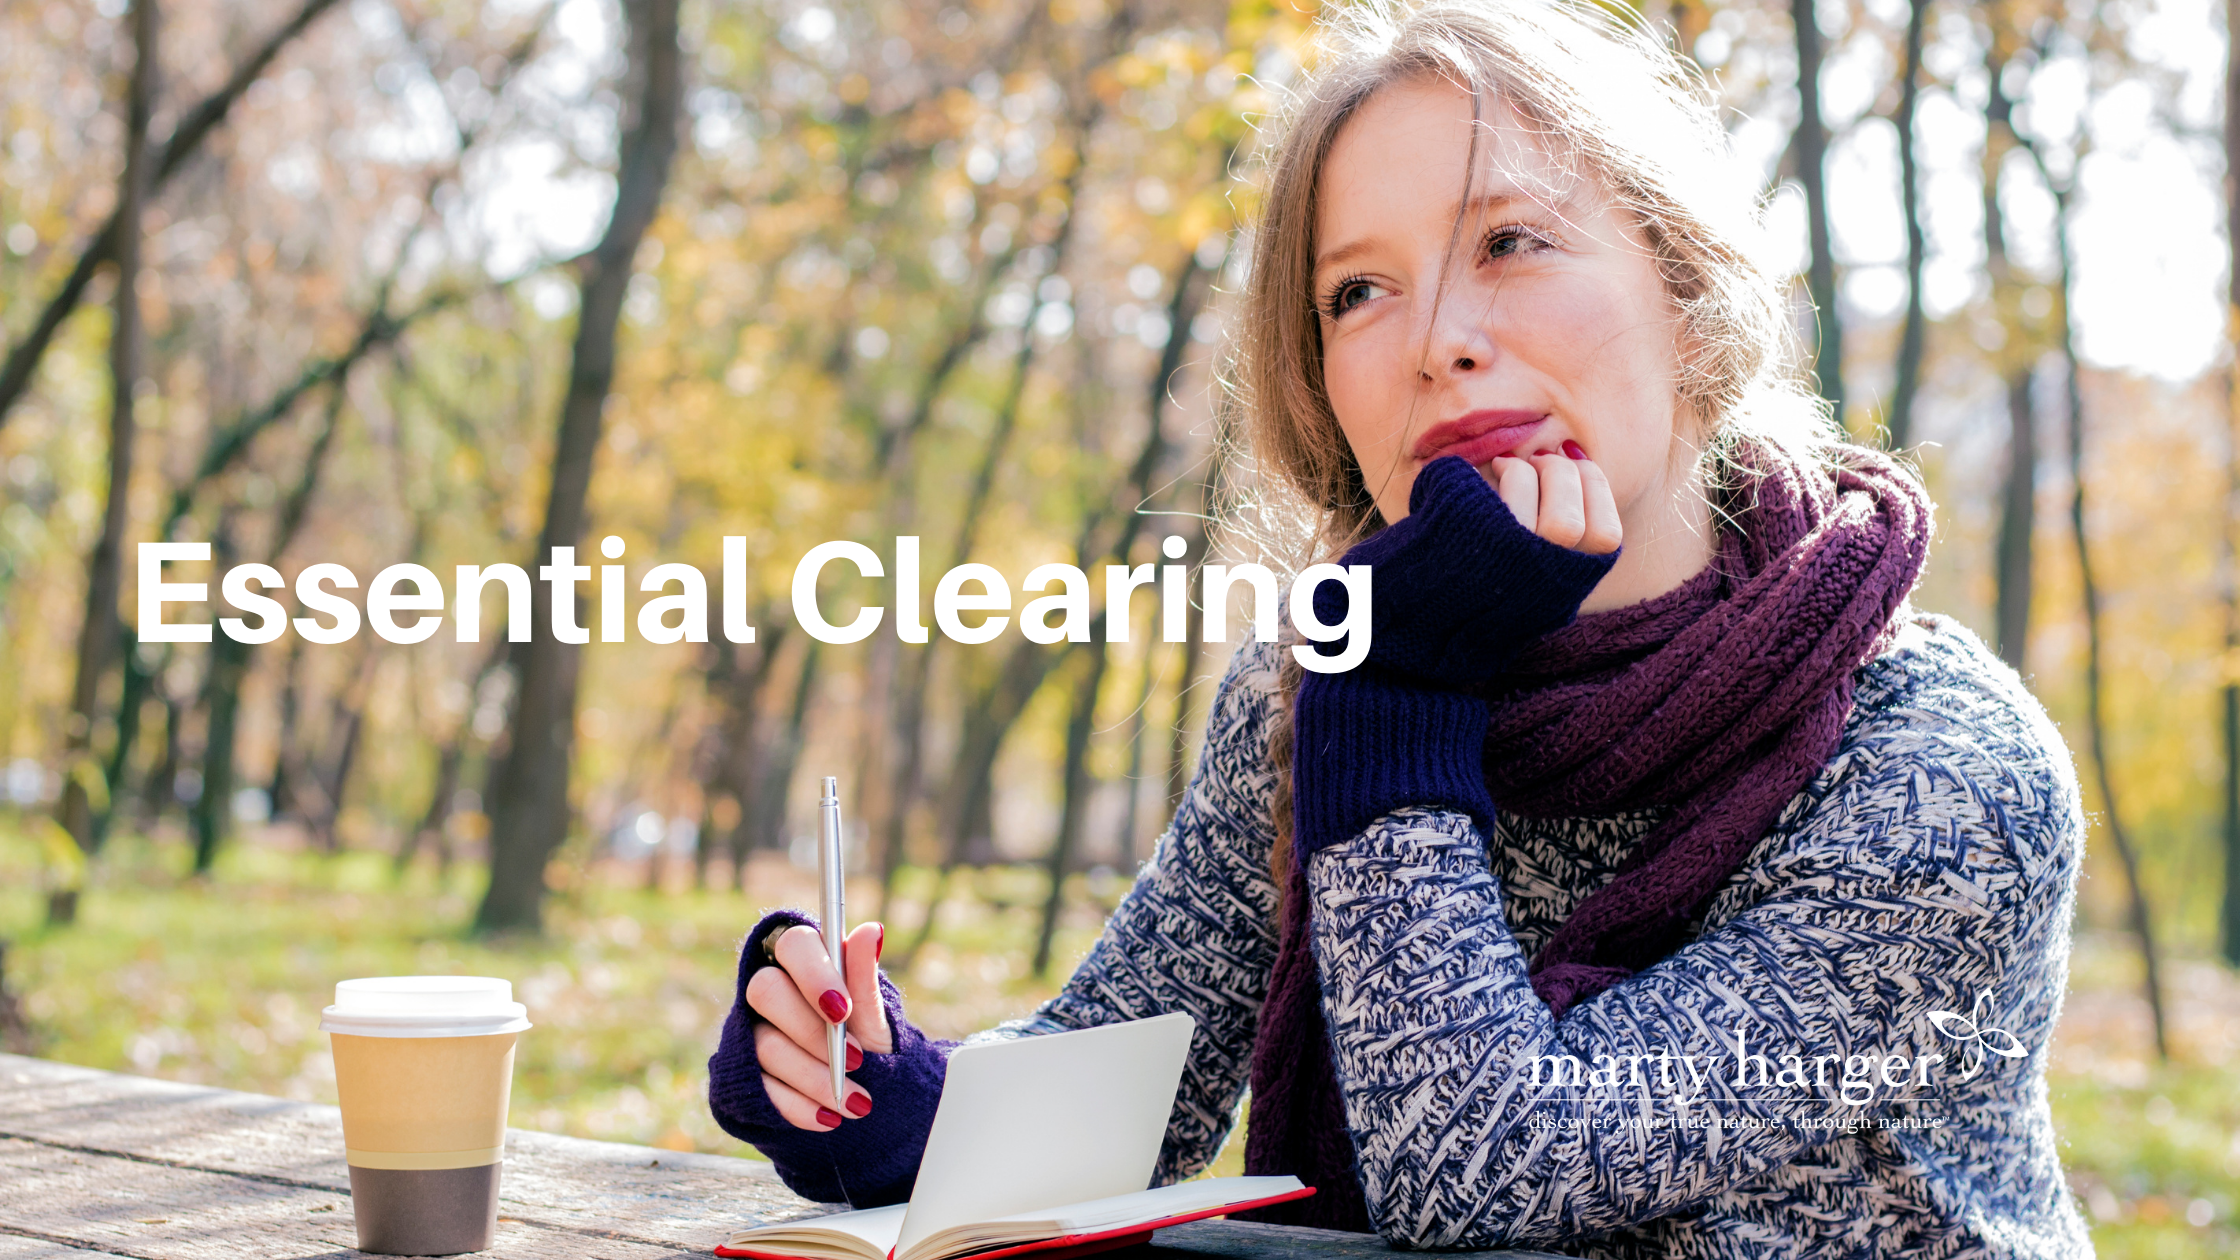 Essential Clearing